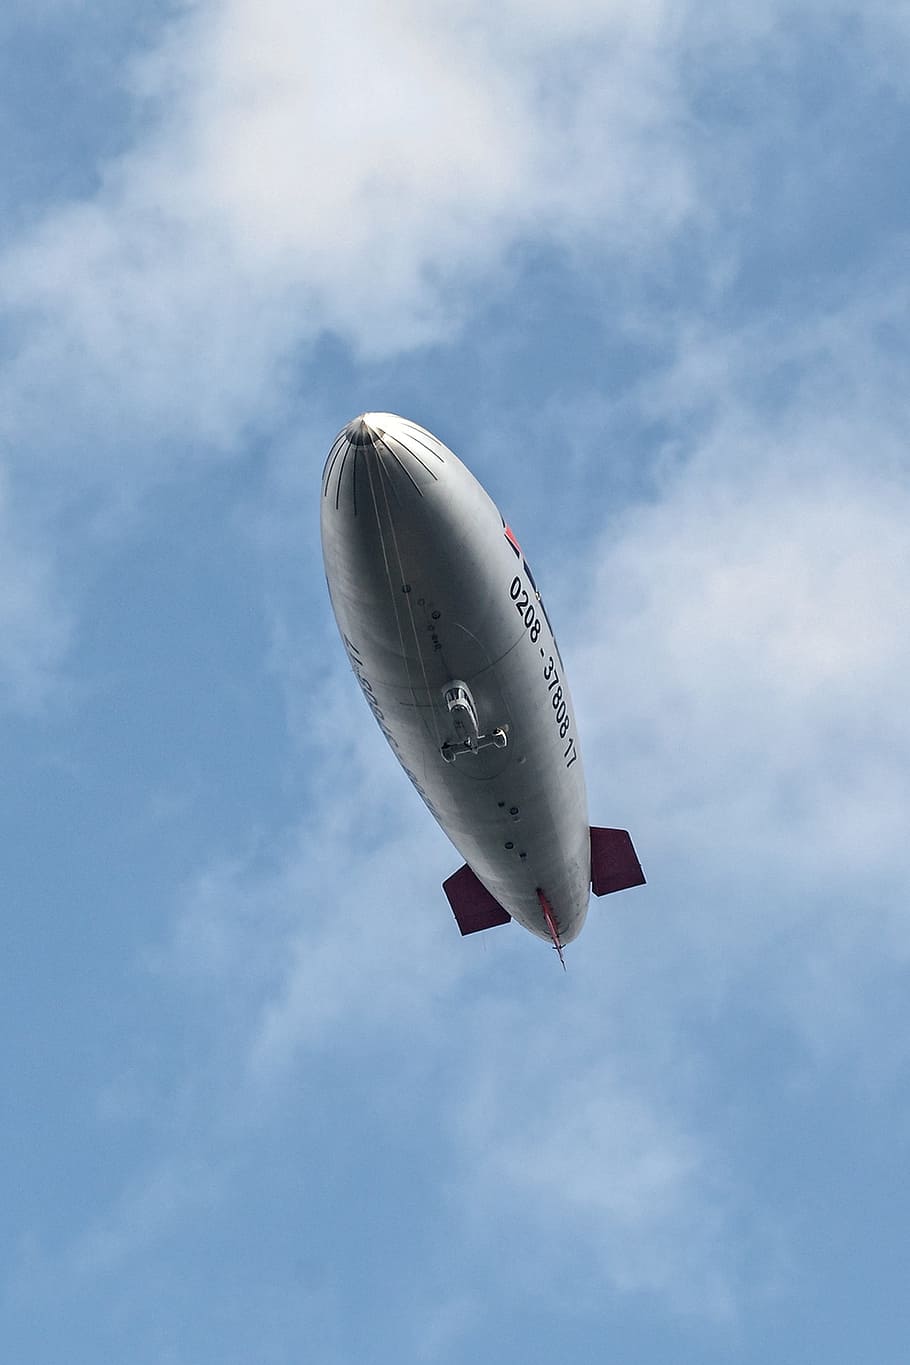 zeppelin, airship, fly, lake constance, float, slightly, sky, cloud - sky, flying, air vehicle